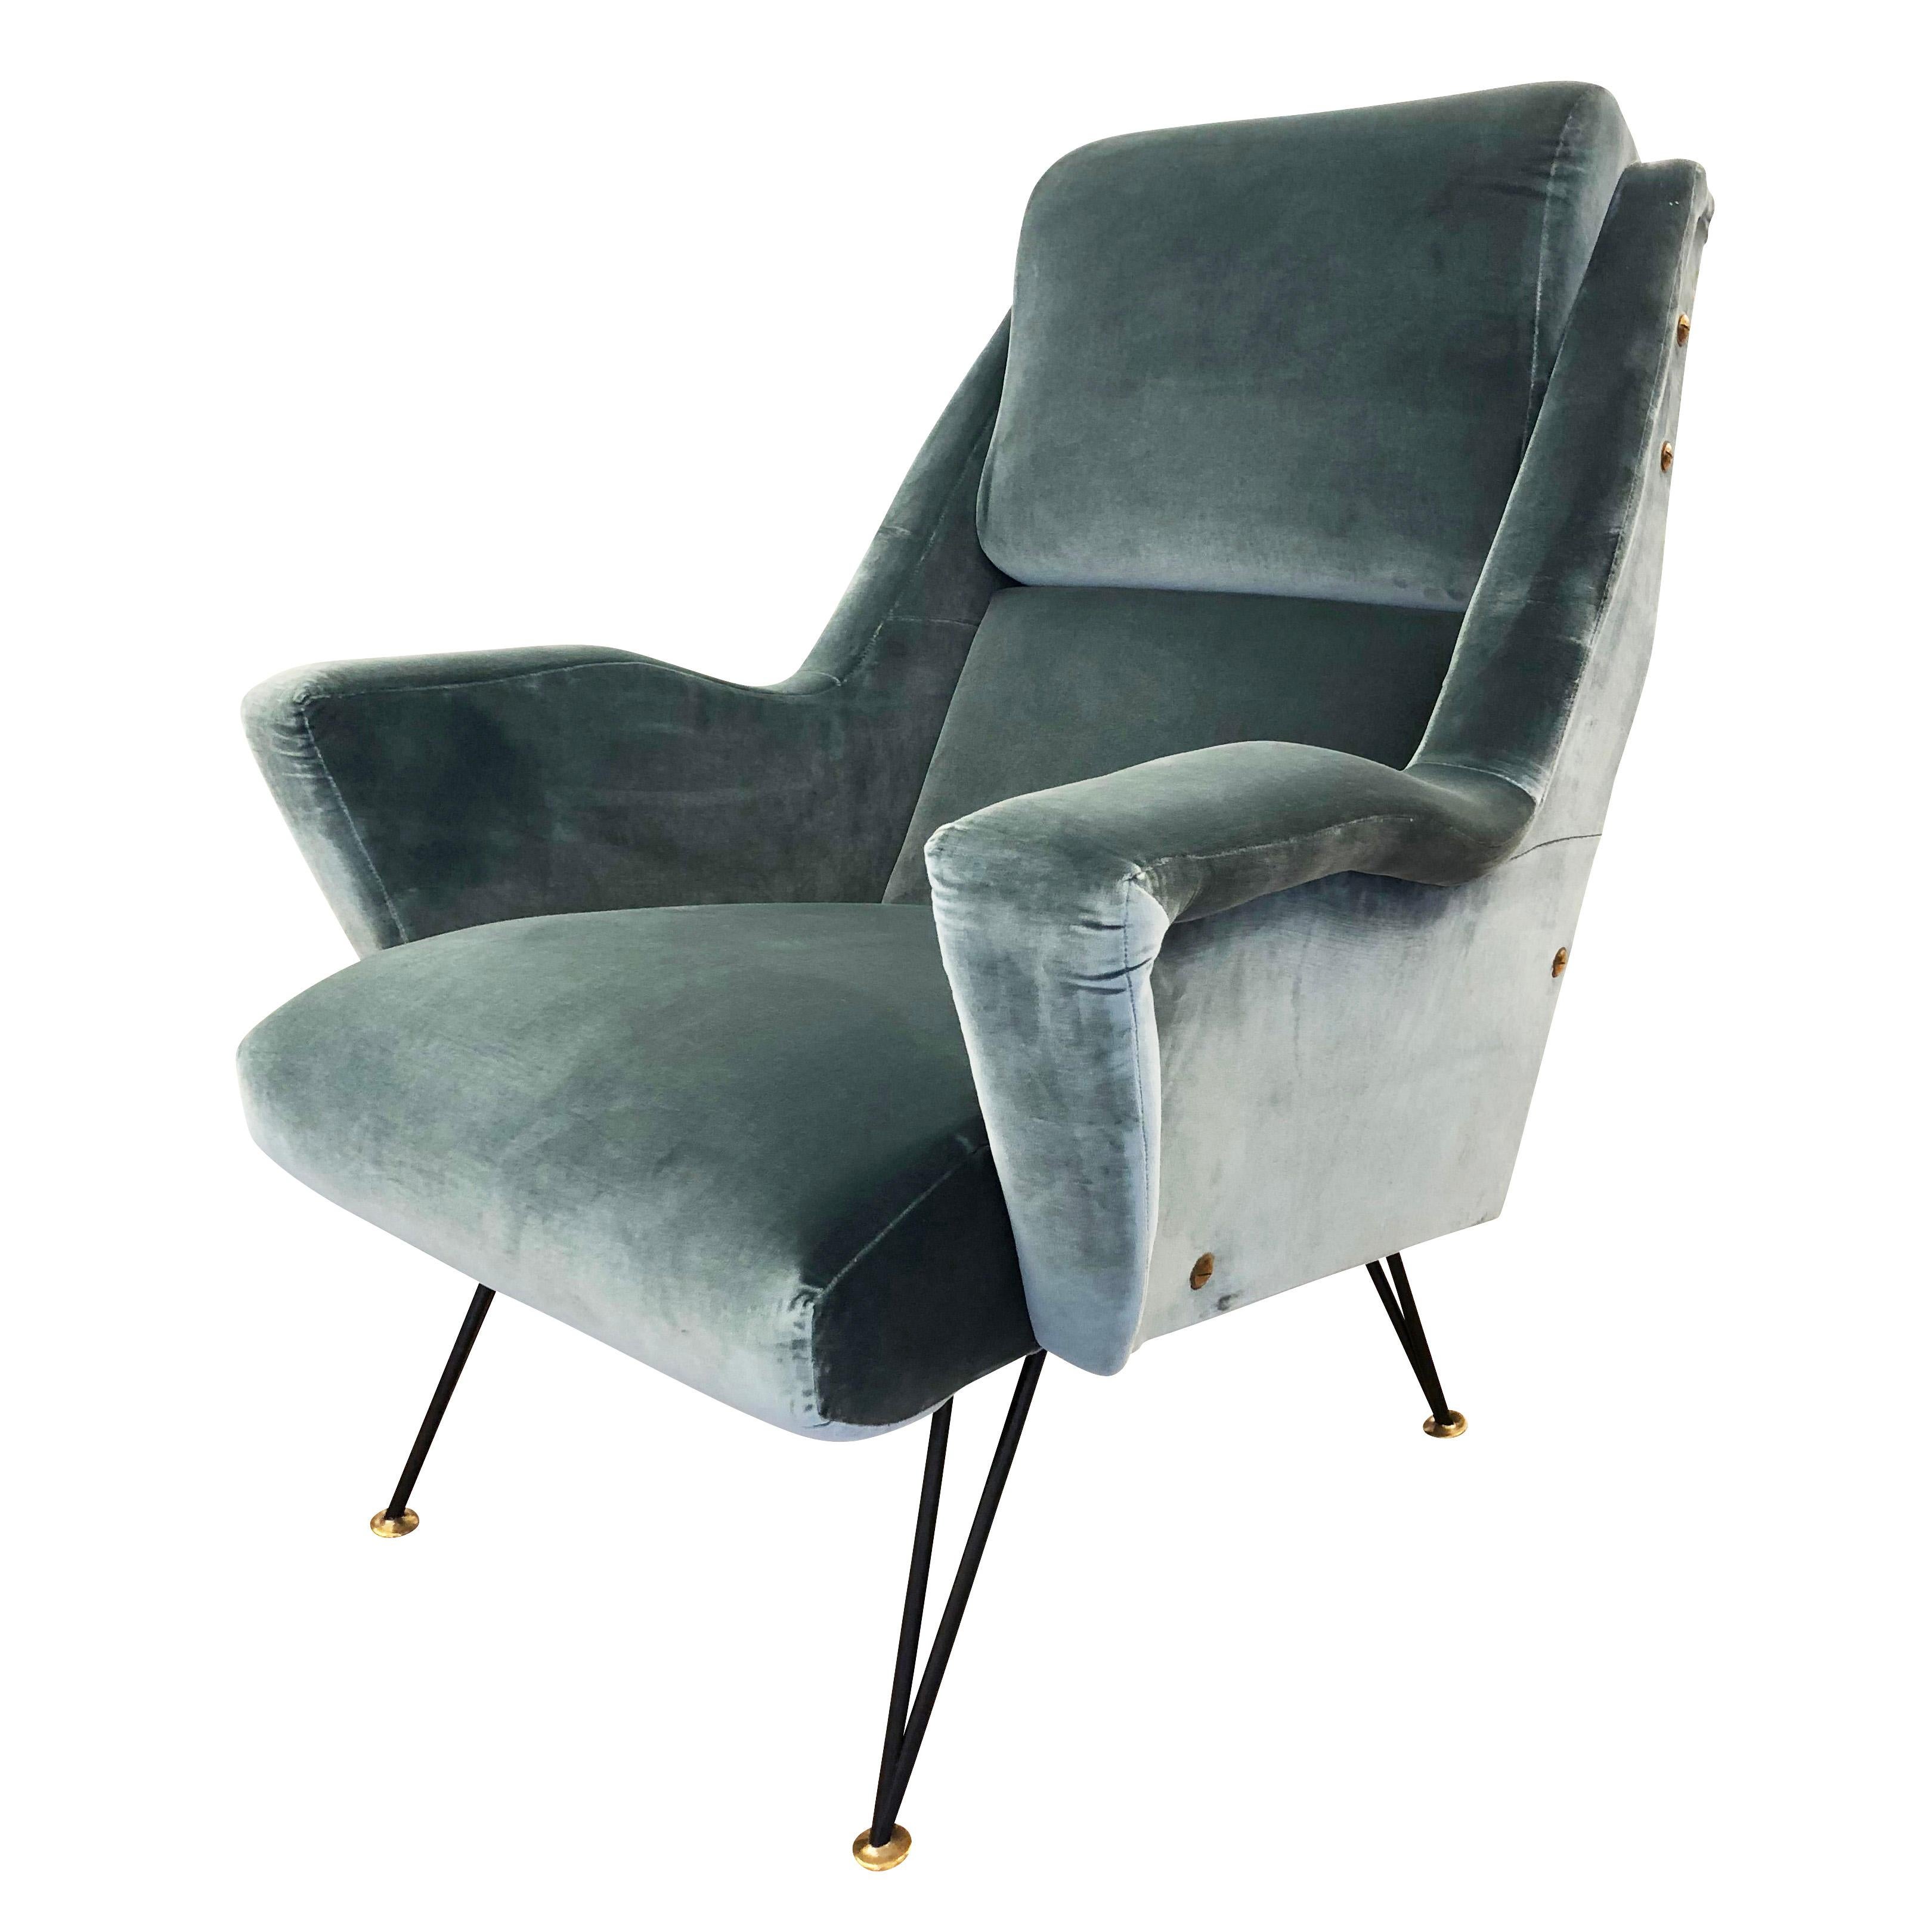 Sculptural pair of Italian Mid-Century lounge chairs upholstered in acqua green velvet. Noteworthy are the shape of the arm rests and legs. Legs are lacquered black with brass feet.

Condition: Excellent vintage condition, minor wear consistent